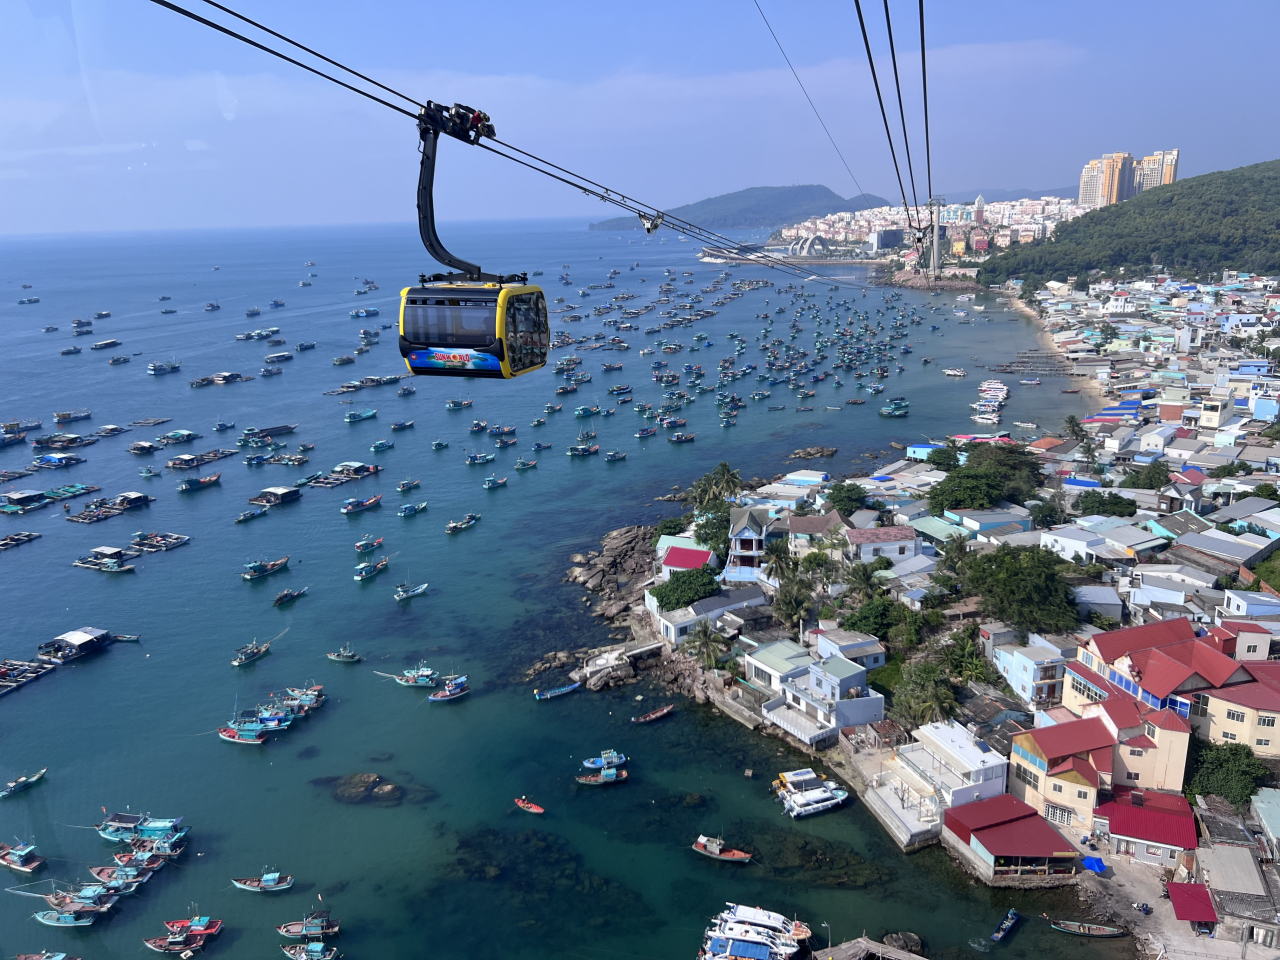 The Hon Thom Cable Car is the world’s longest non-stop three-way cable car in Sun World Hon Thom Nature Park in Phu Quoc. (Park Jun-hee/The Korea Herald)